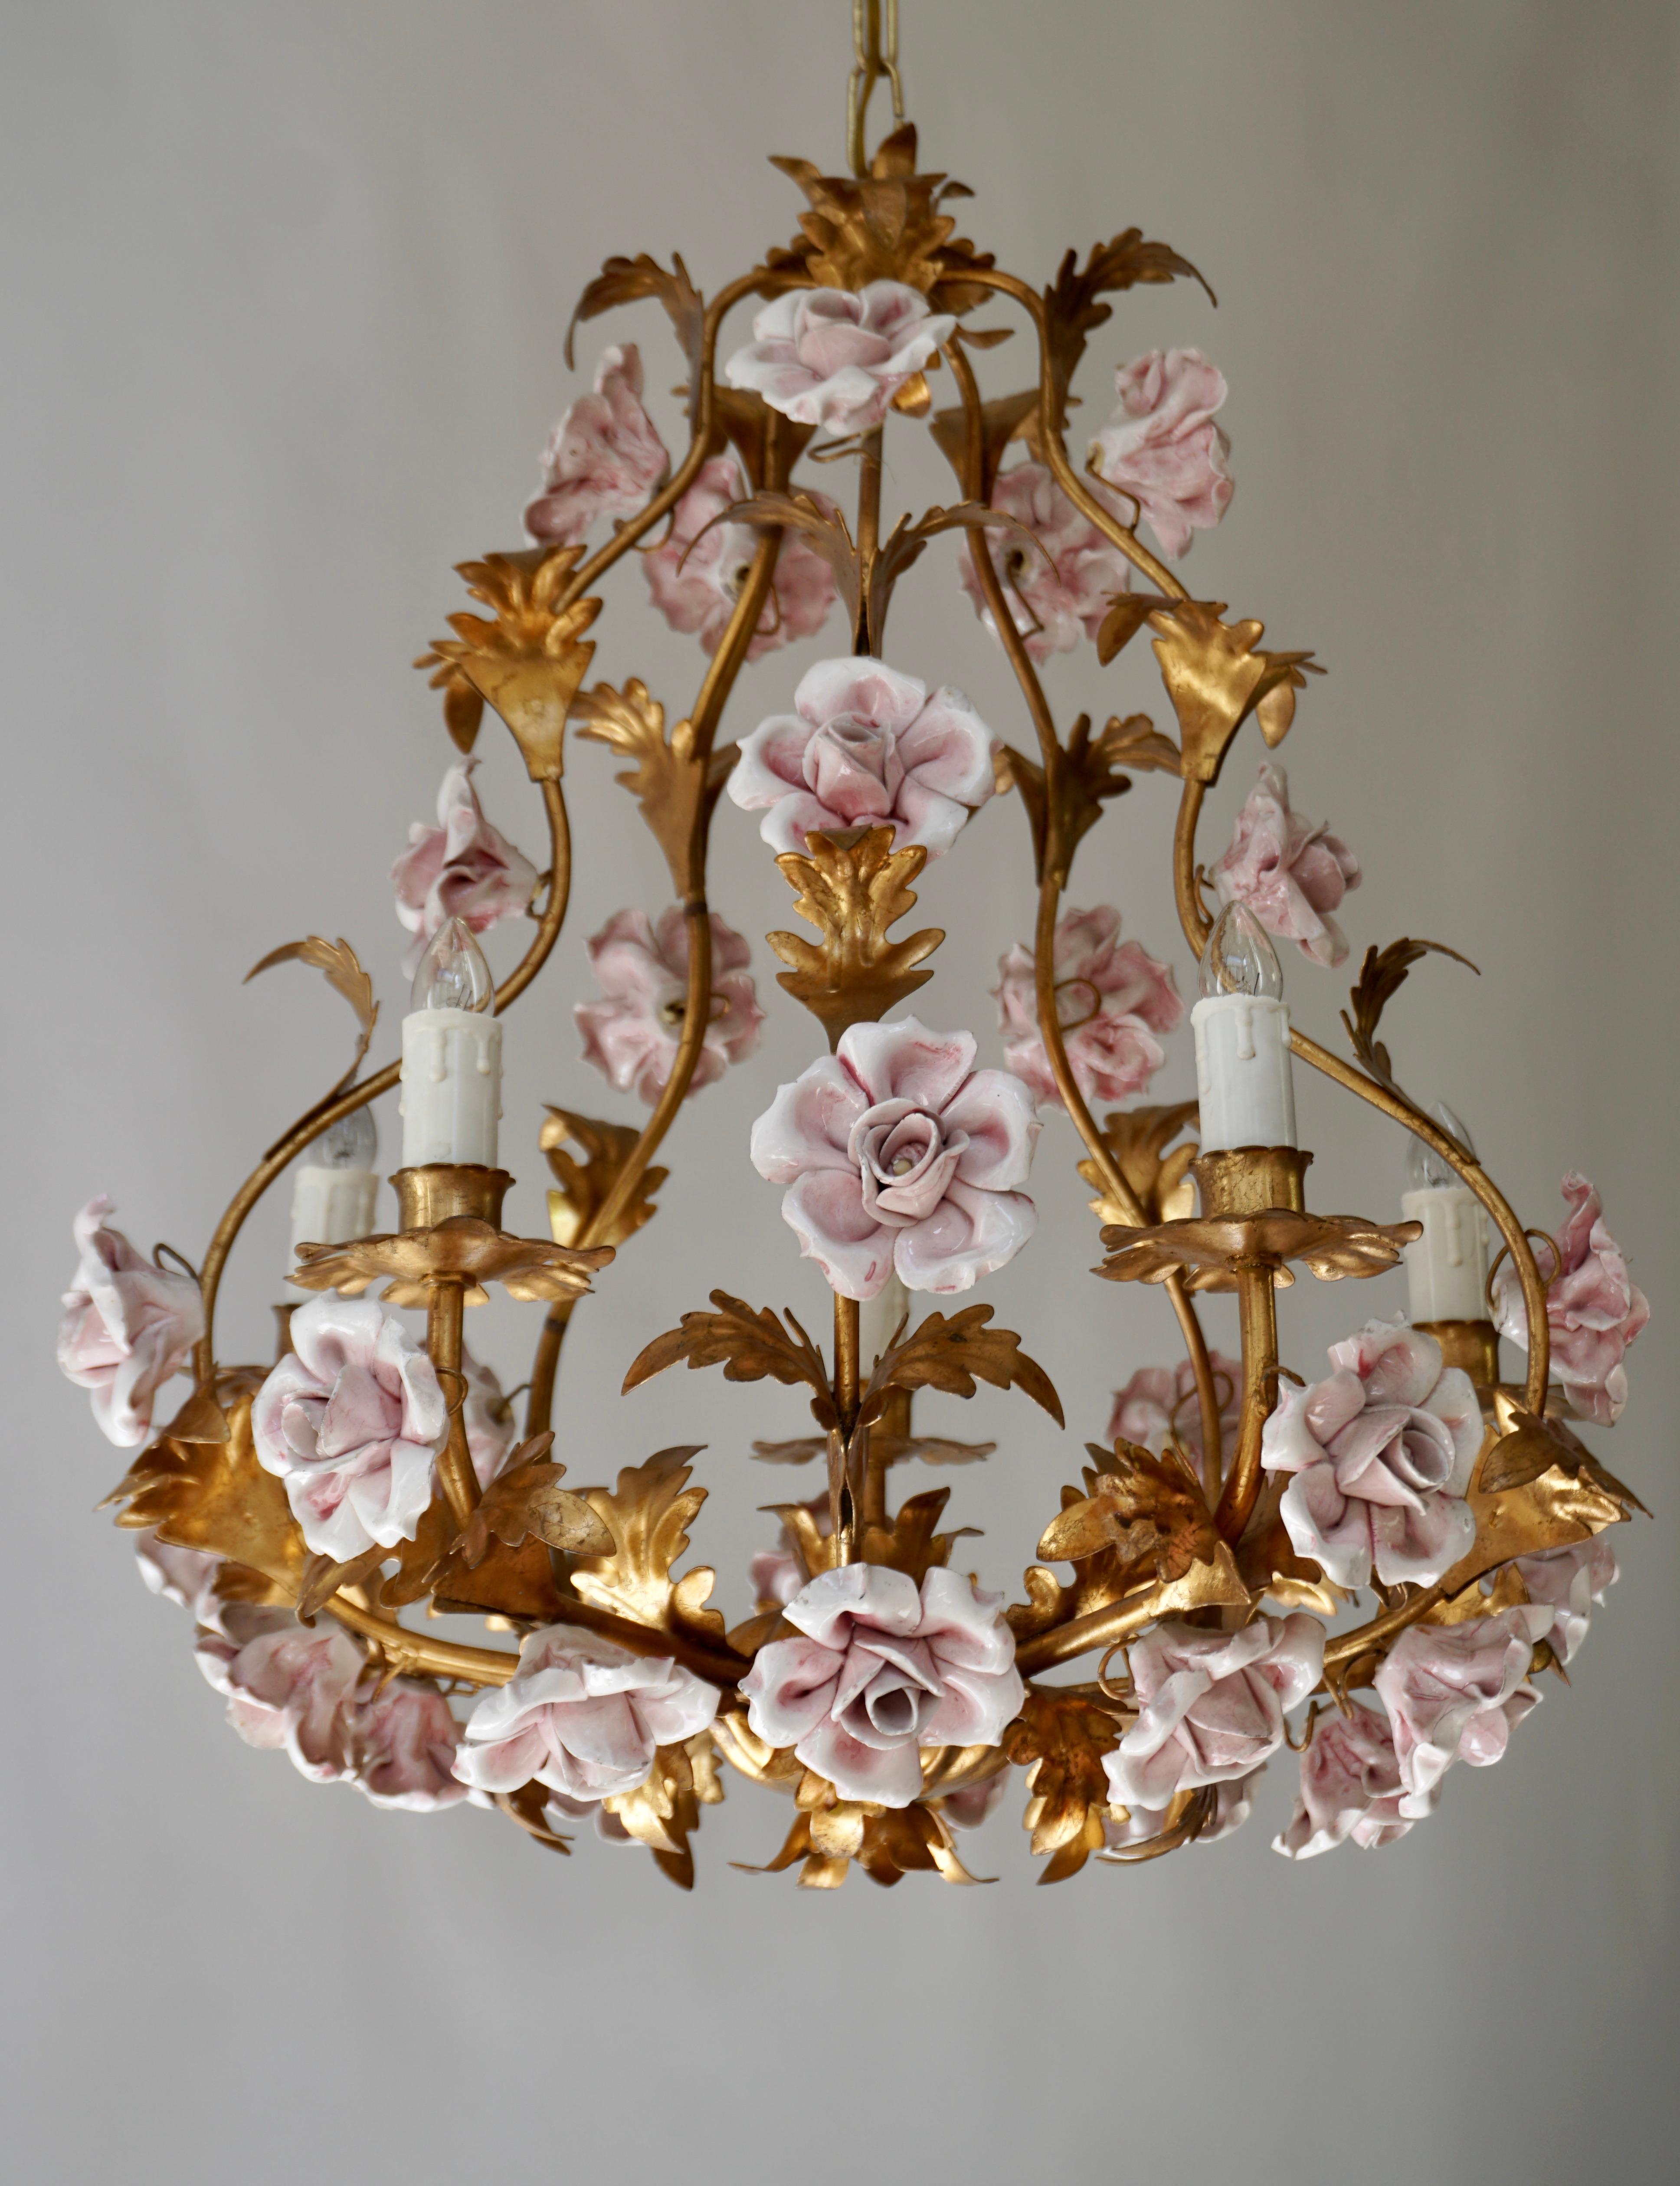 Italian Hollywood Regency six light chandelier in brass with pink porcelain flowers. 

Diameter 50 cm - 19.7 inch.
Height fixture 55 cm - 21.6 inch.
Total height including the chain 70 cm - 27.5 inch.

We have the same chandelier but with pink